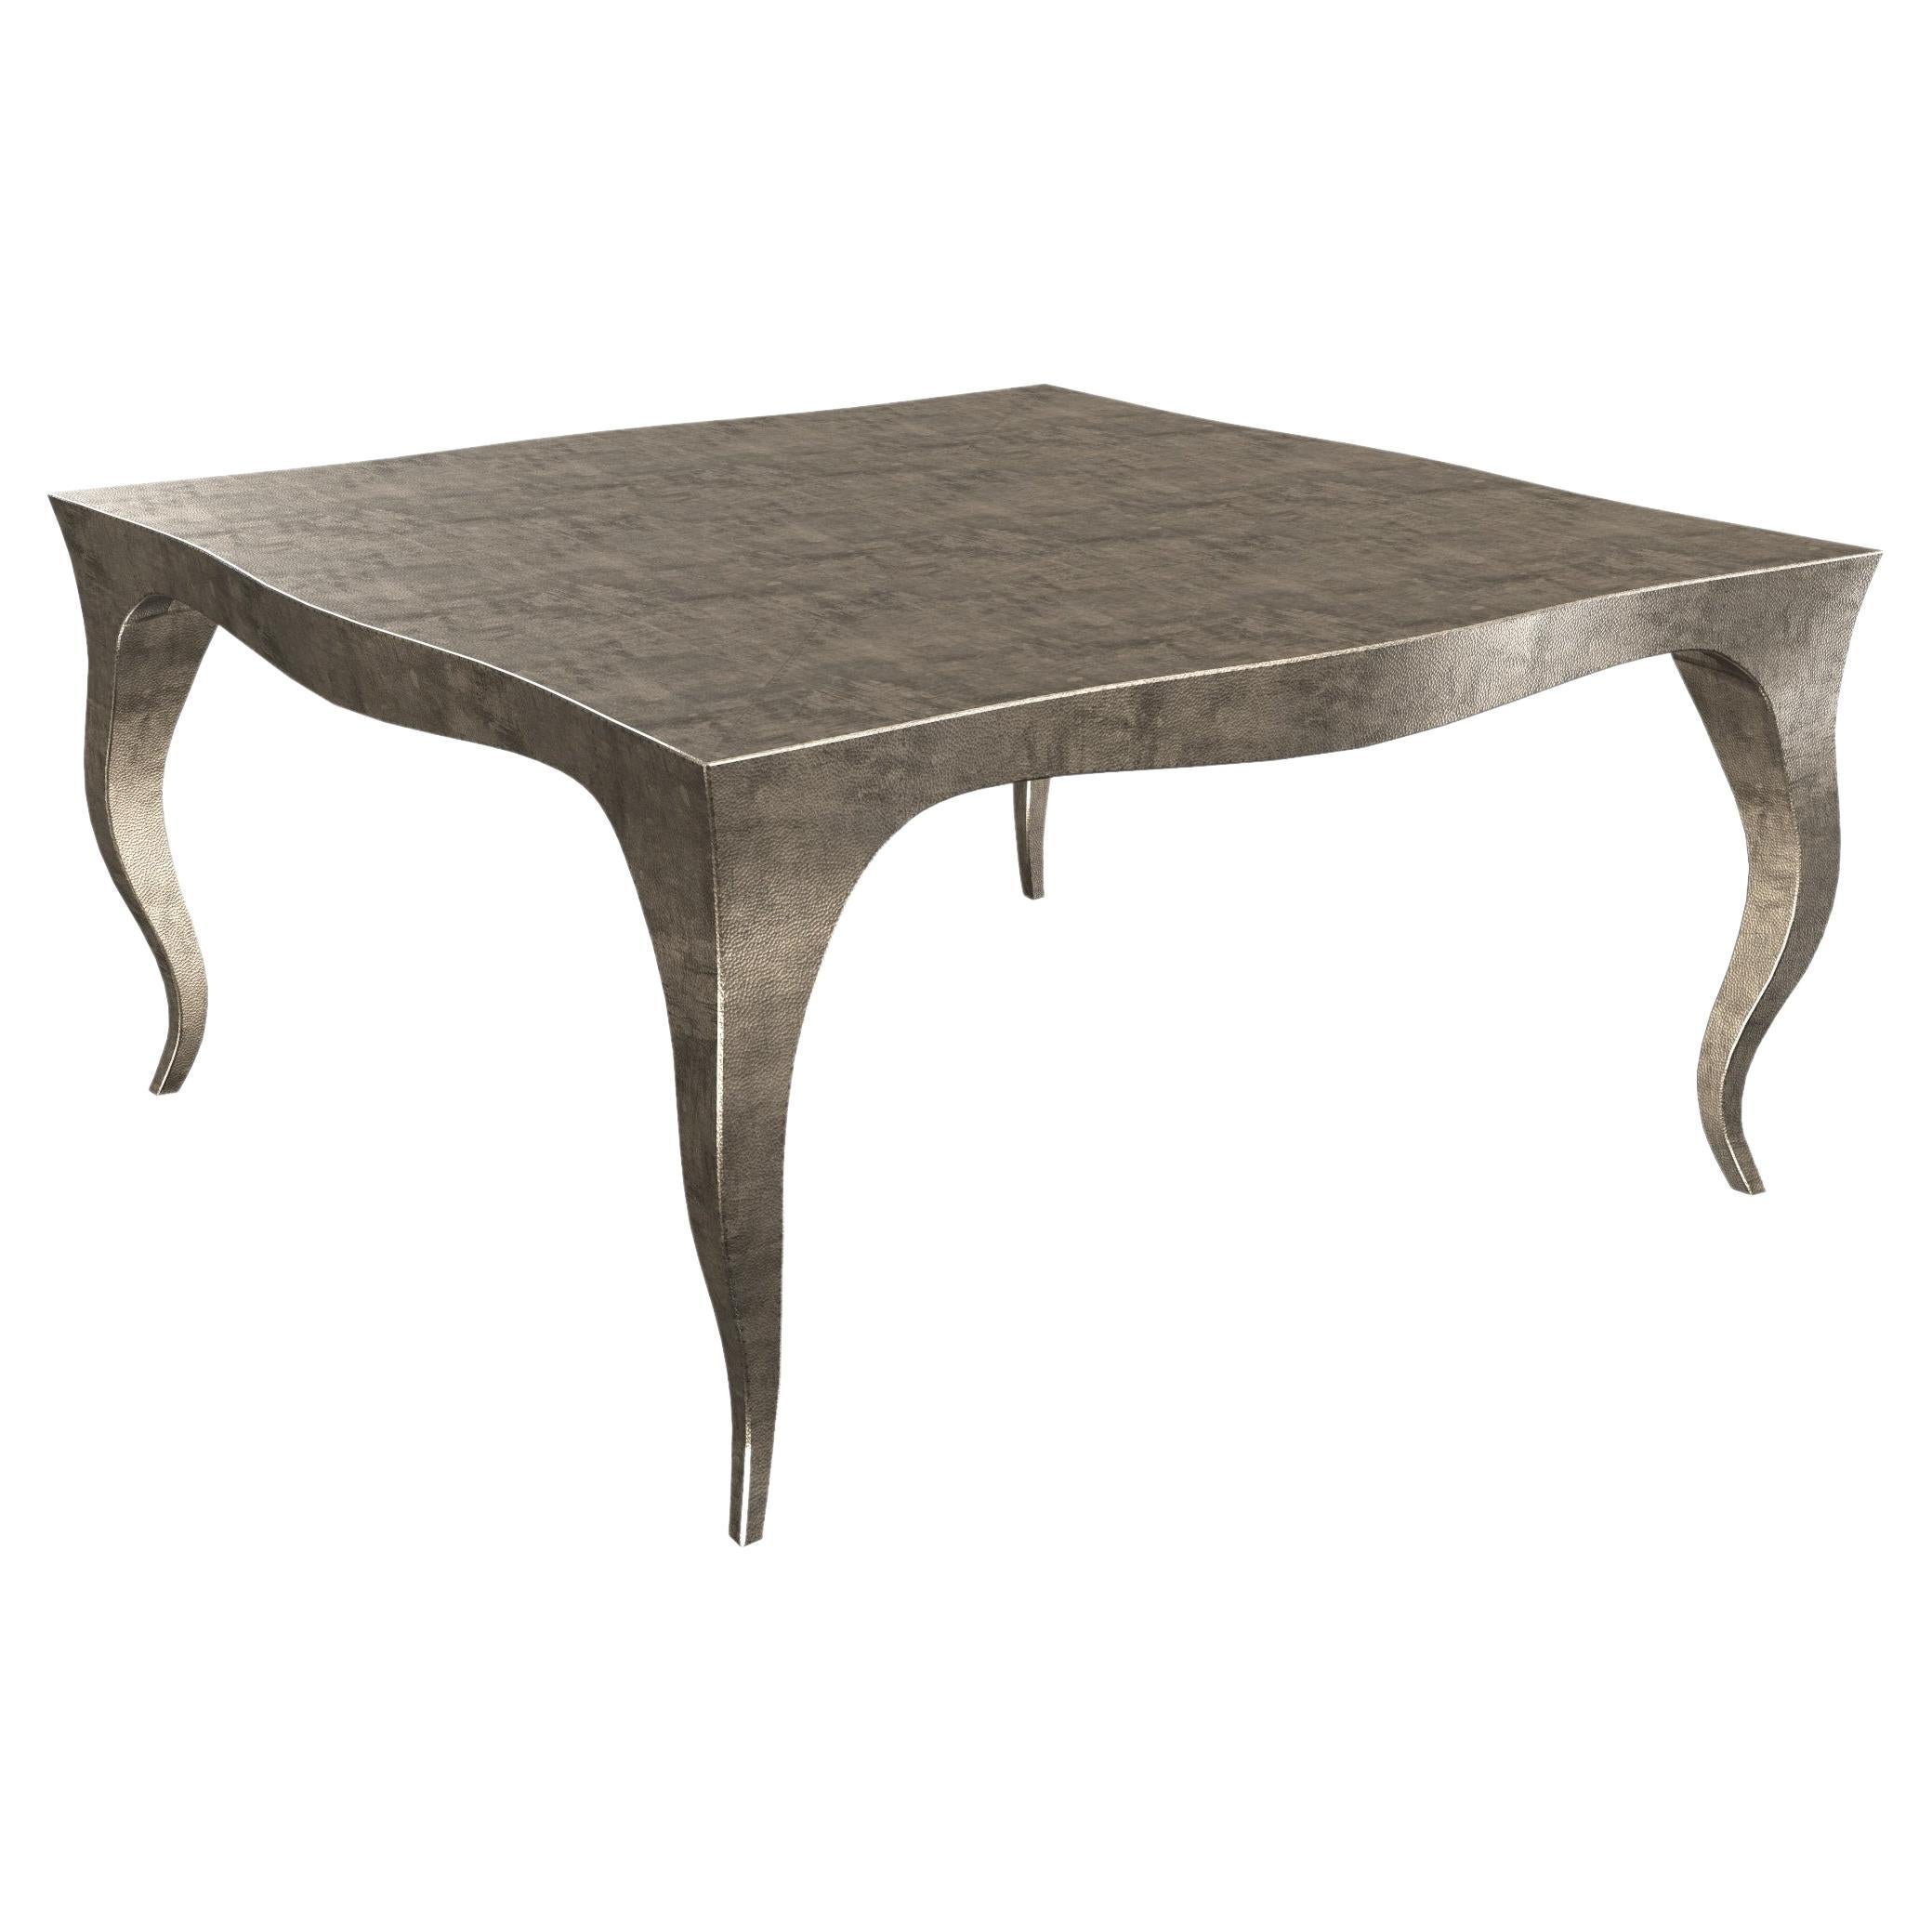 Louise Art Deco Industrial Tables Mid. Hammered Antique Bronze 18.5x18.5x10 Inch For Sale